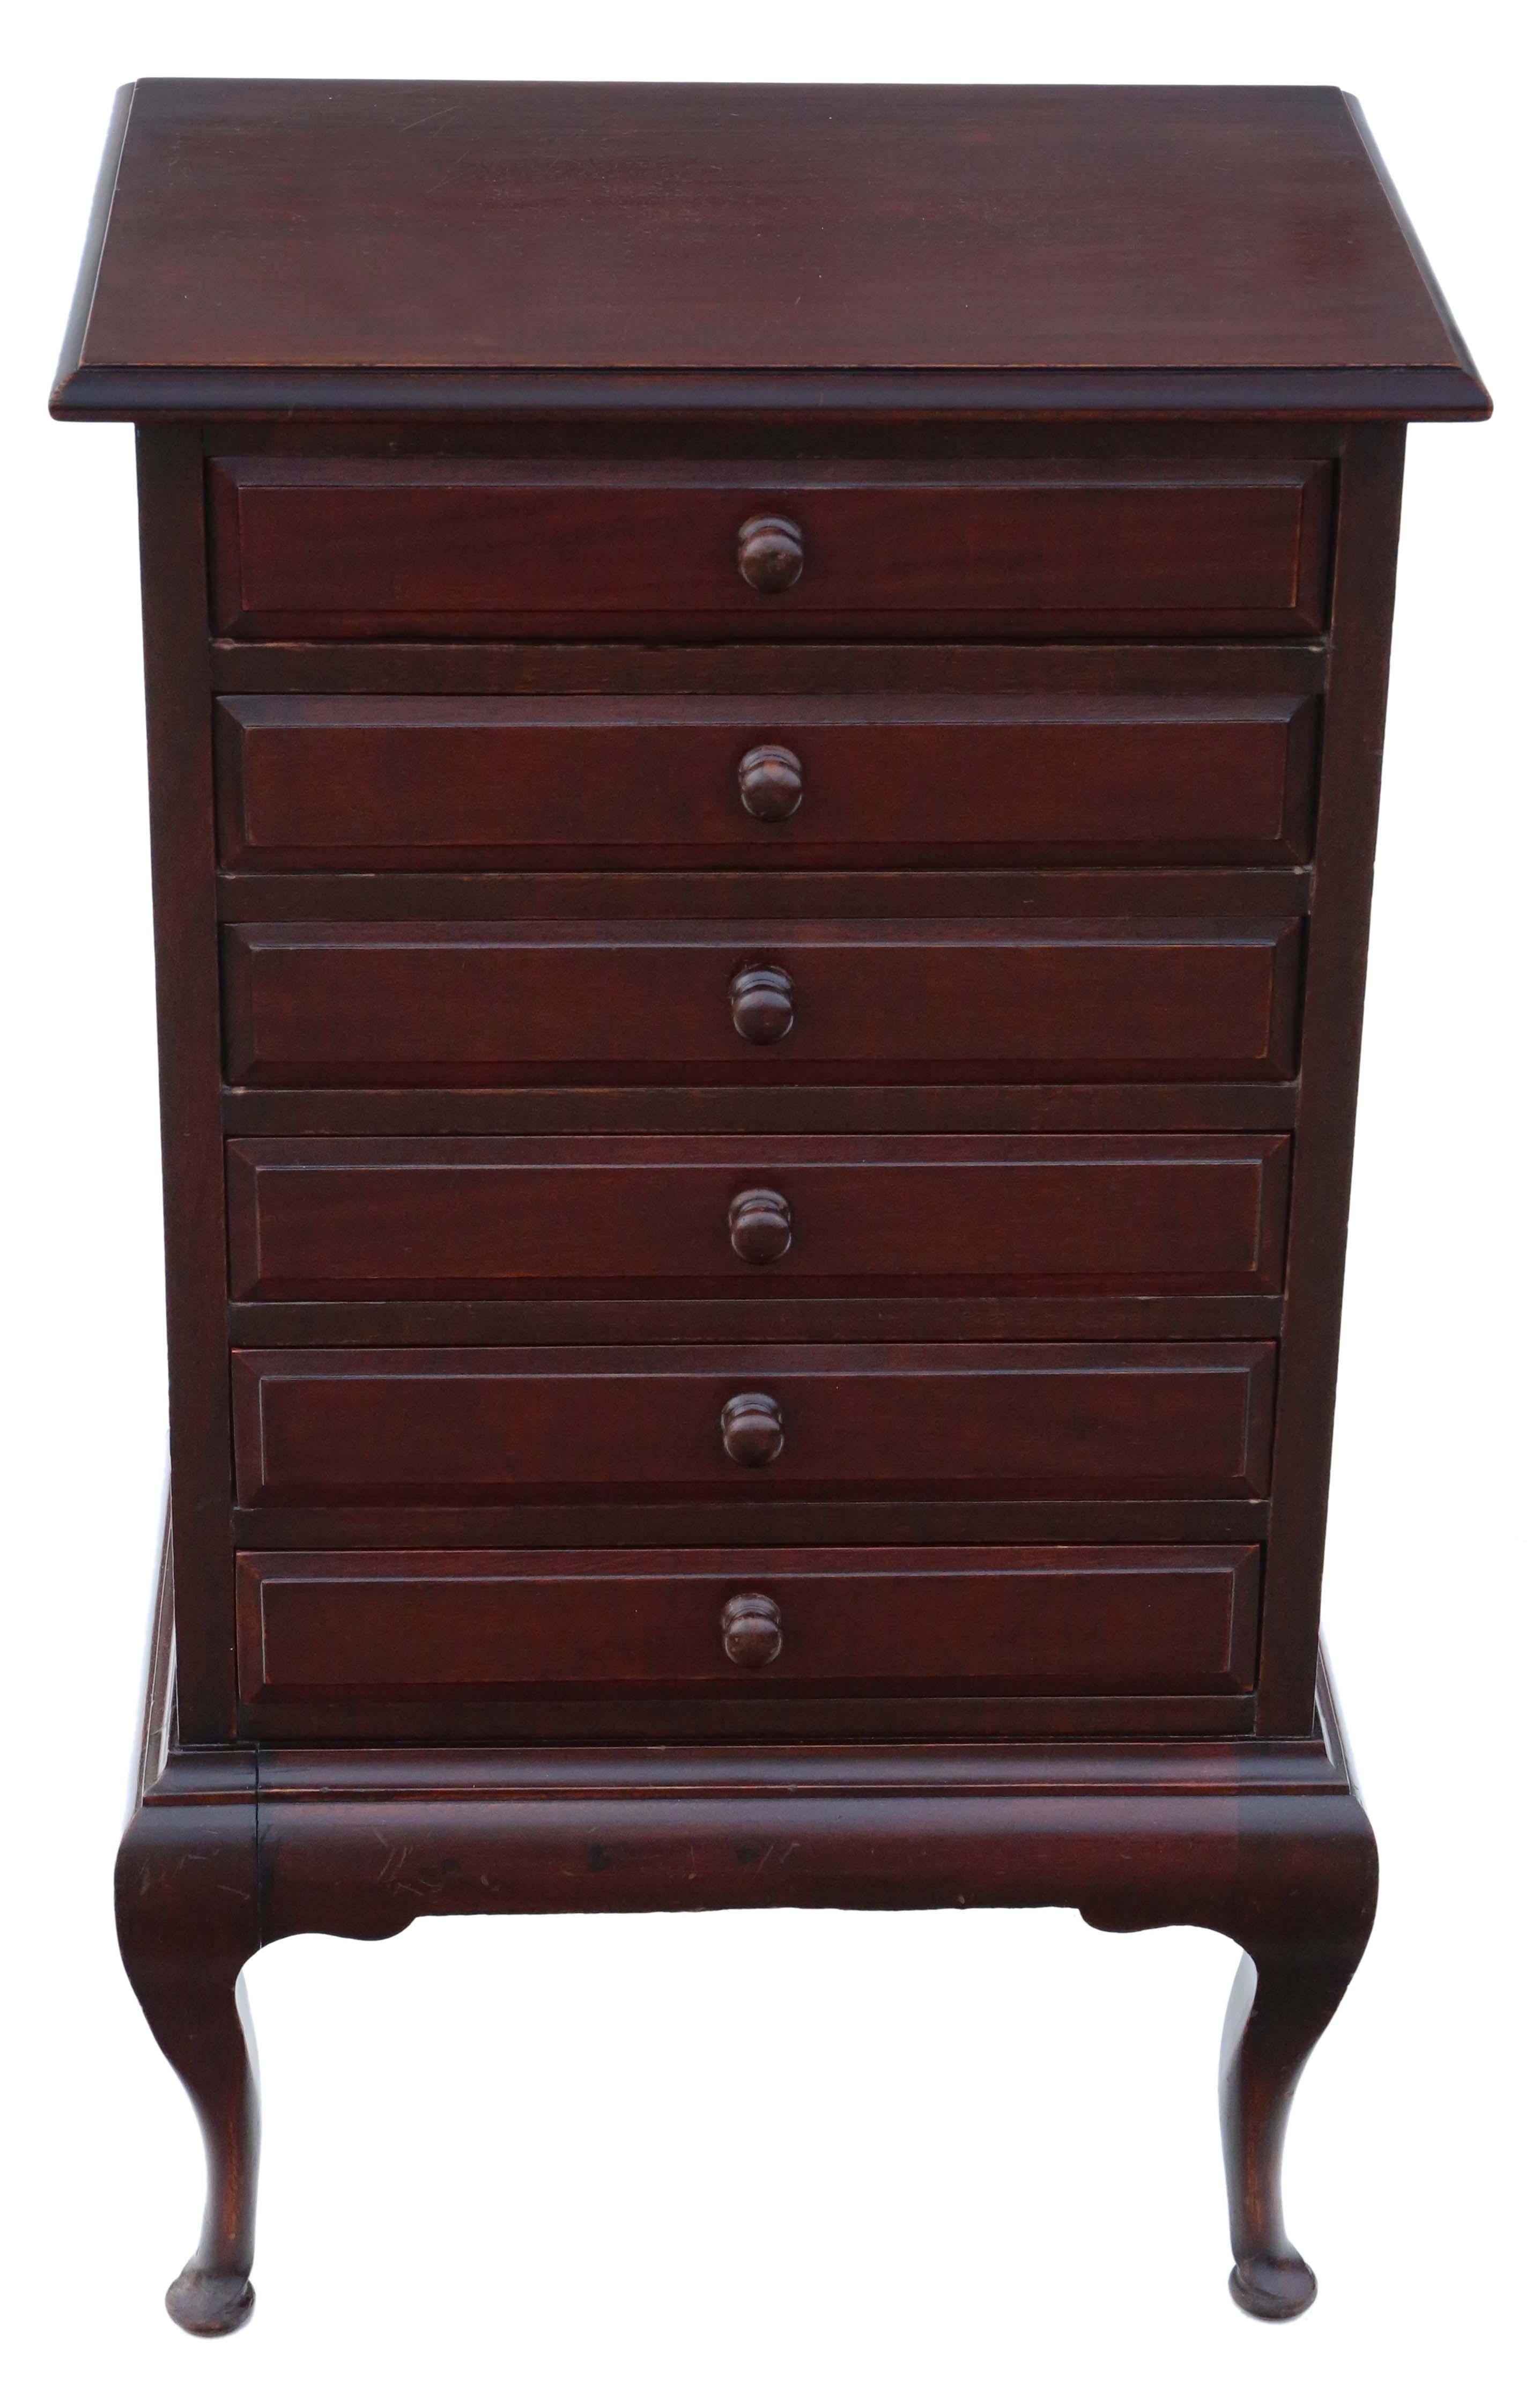 Antique C1920 6 drawer mahogany music chest cabinet cupboard.

This is a lovely item, that is full of age, charm and character. Top drawer is a traditional, the remainder have drop down fronts, typical of music chests (for sheet music).

Solid, with